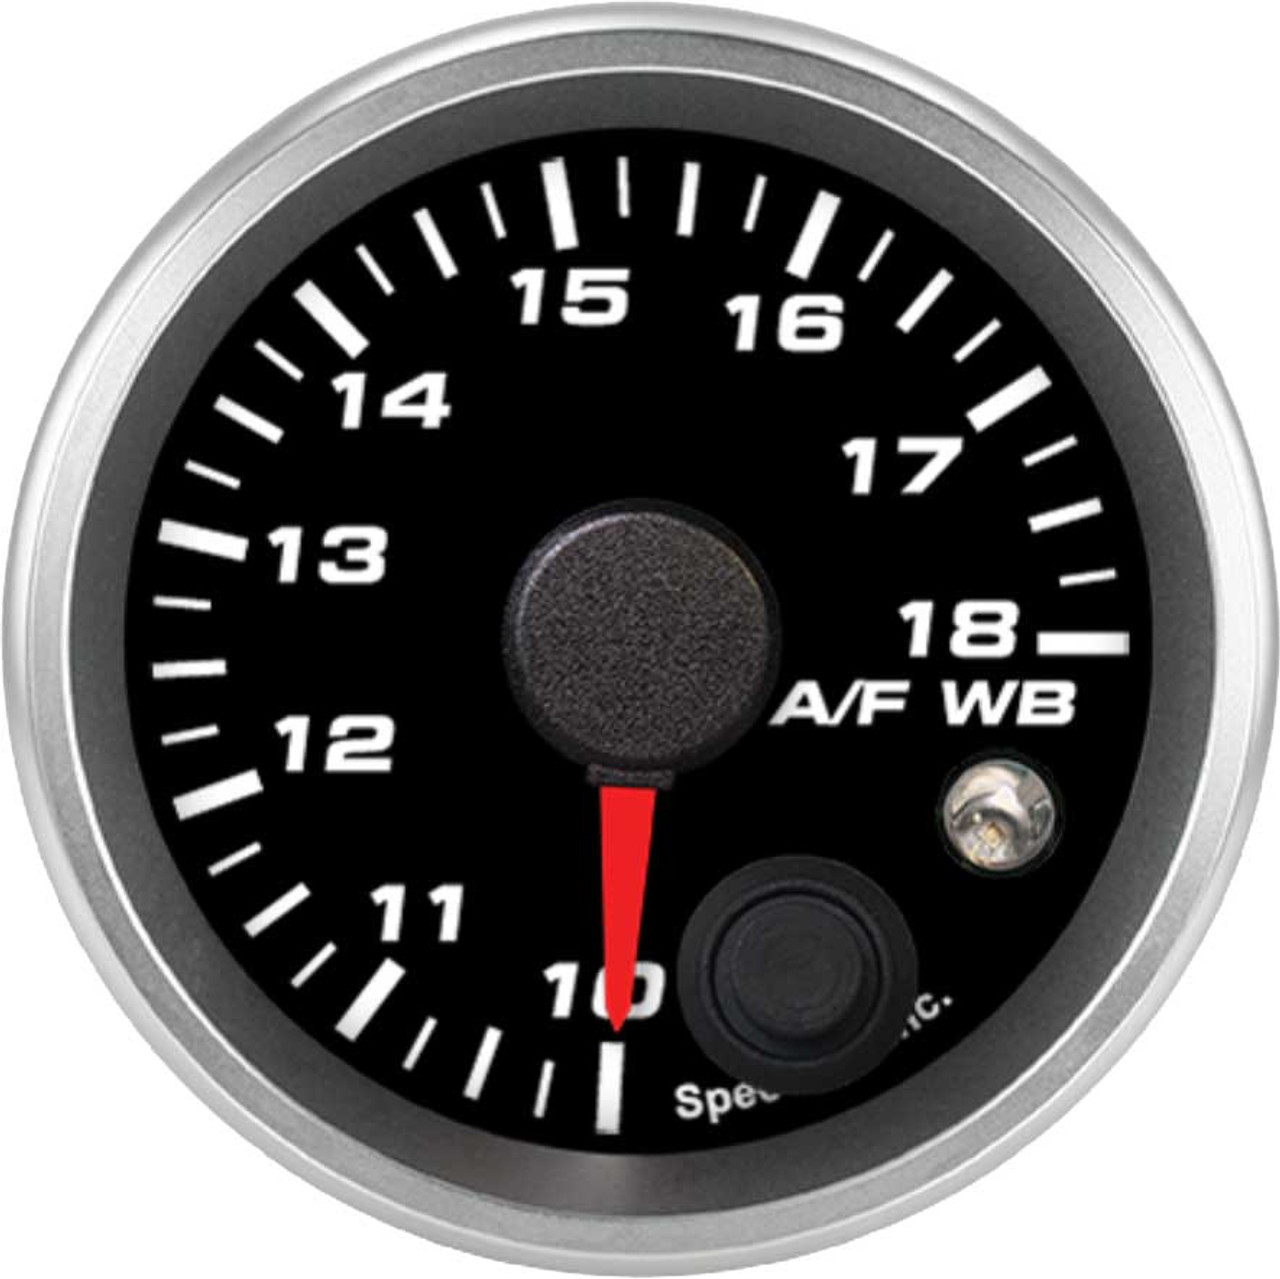 2-1/16" Air/Fuel Wide Band Gauge 10-18 (w/ warning) (FOR INNOVATE)